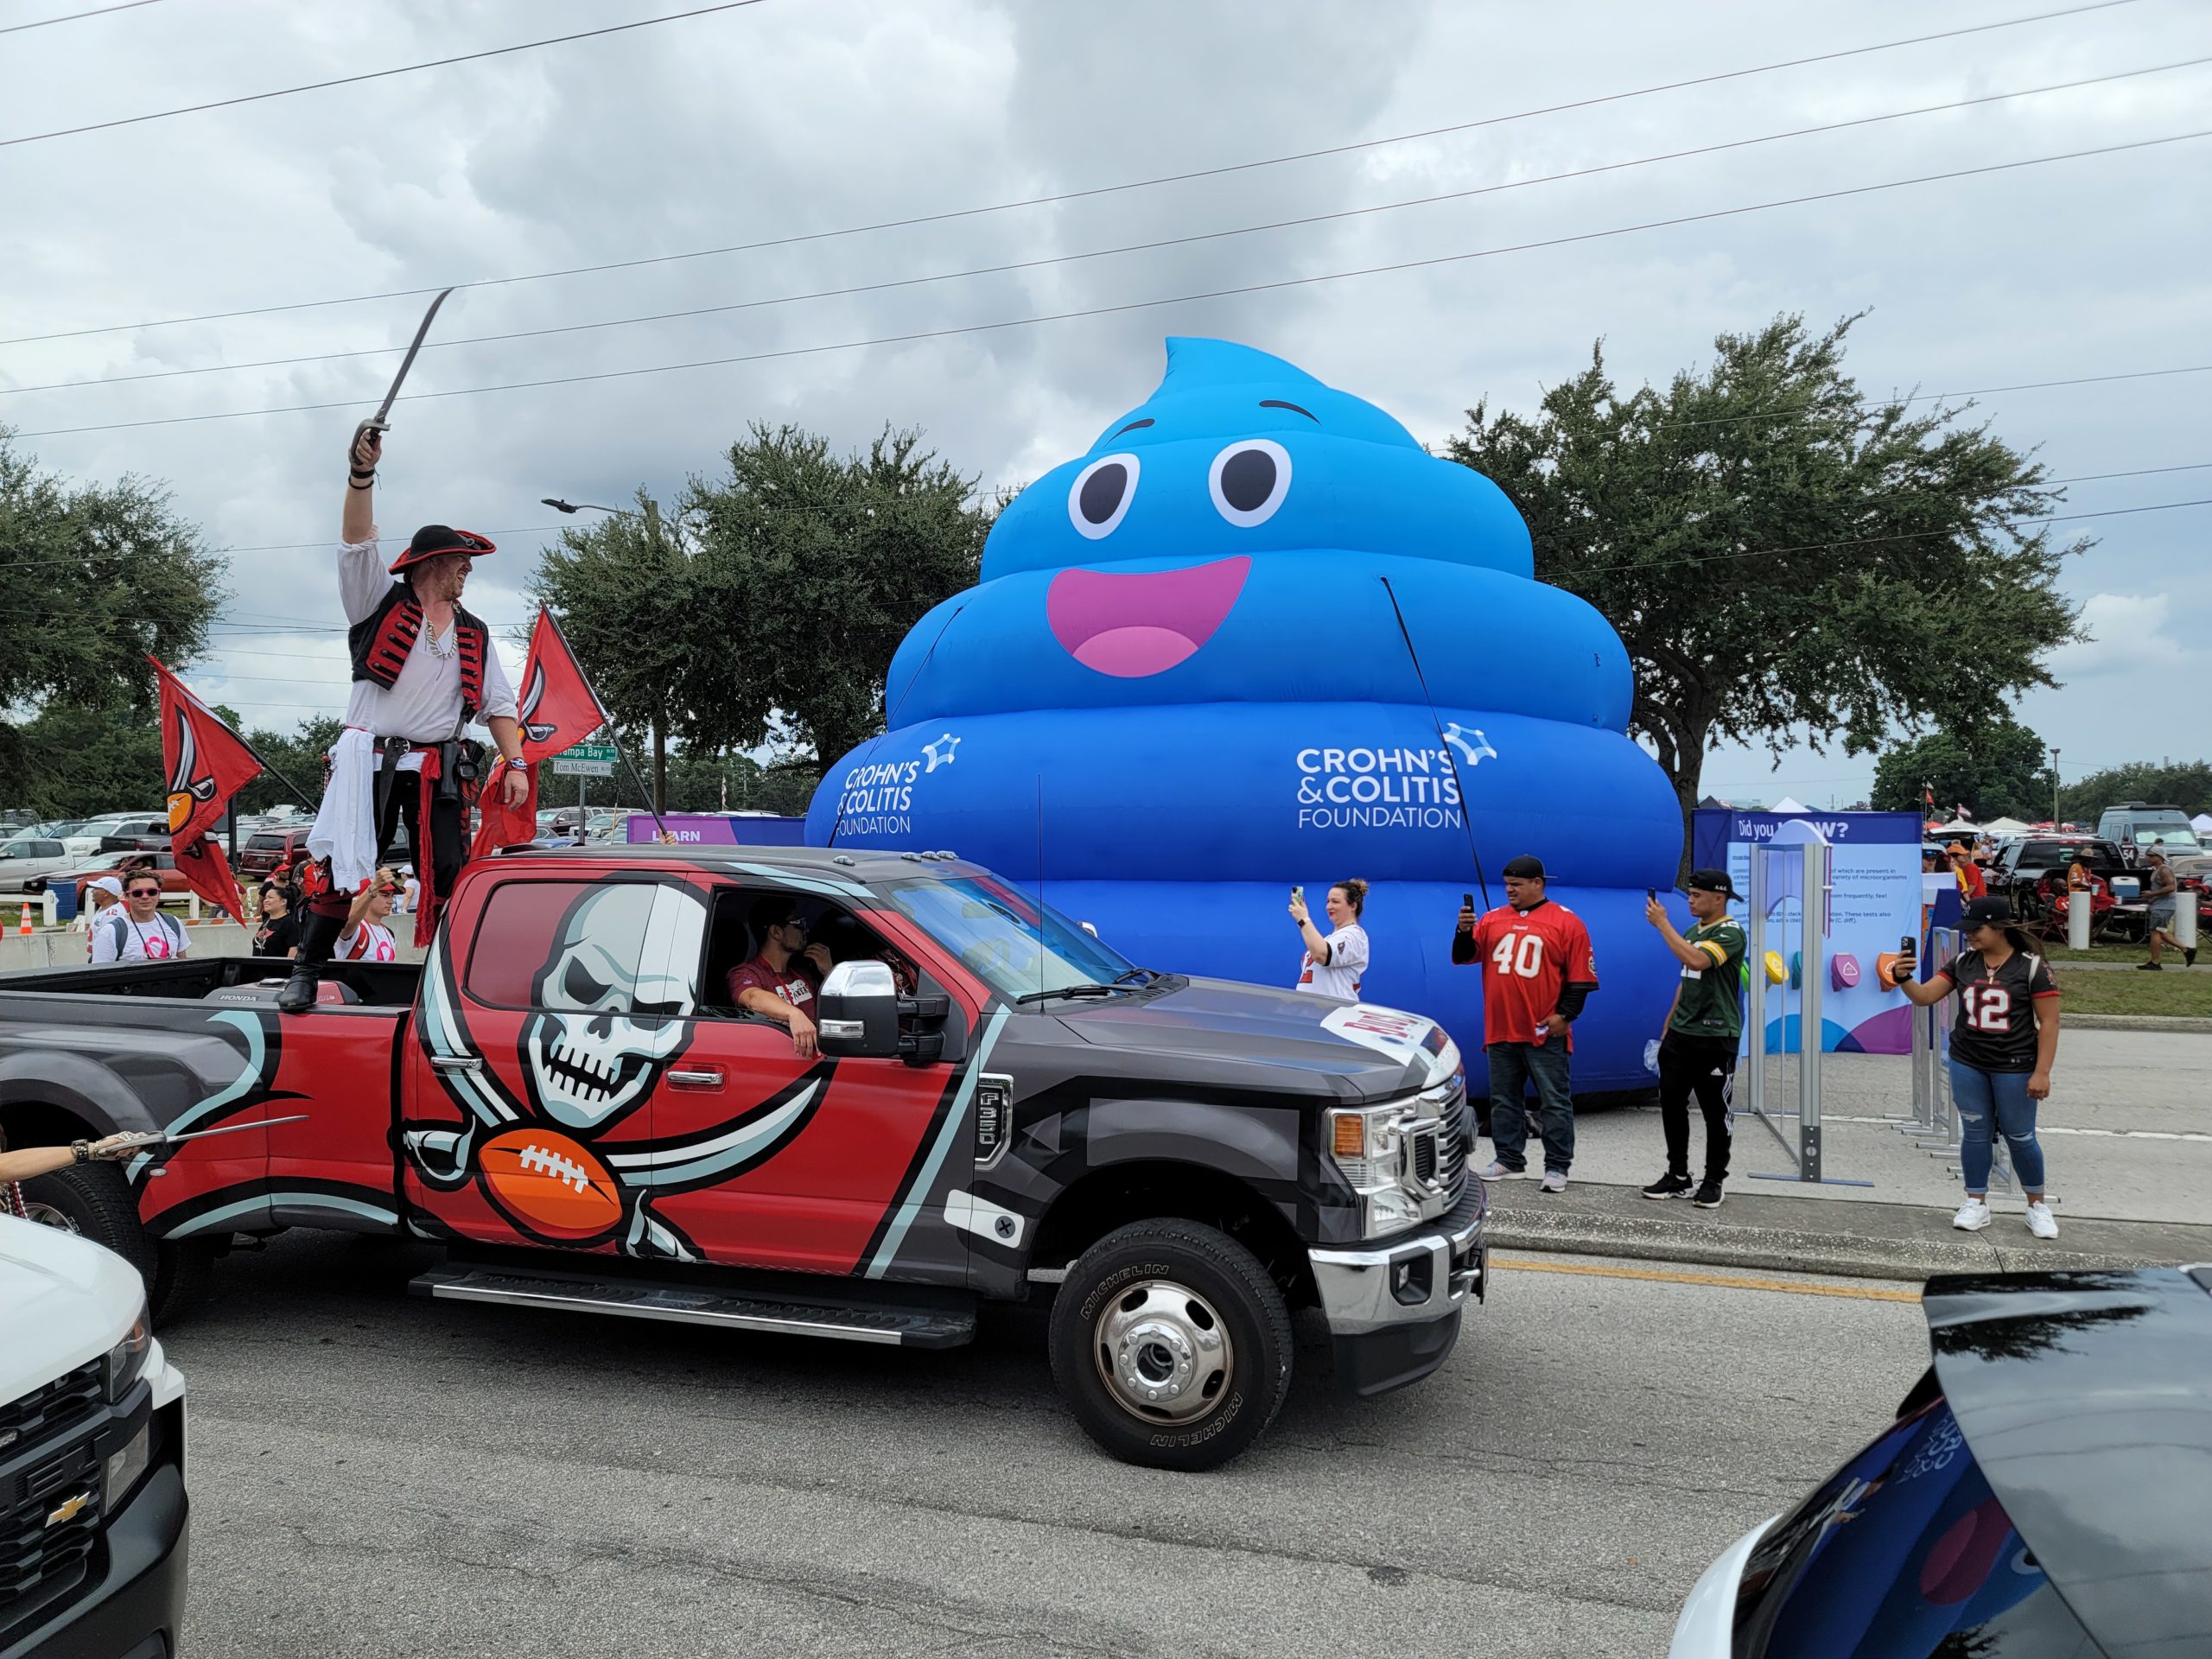 Pirate parade in front of Crohn's and Colitis PoopUp